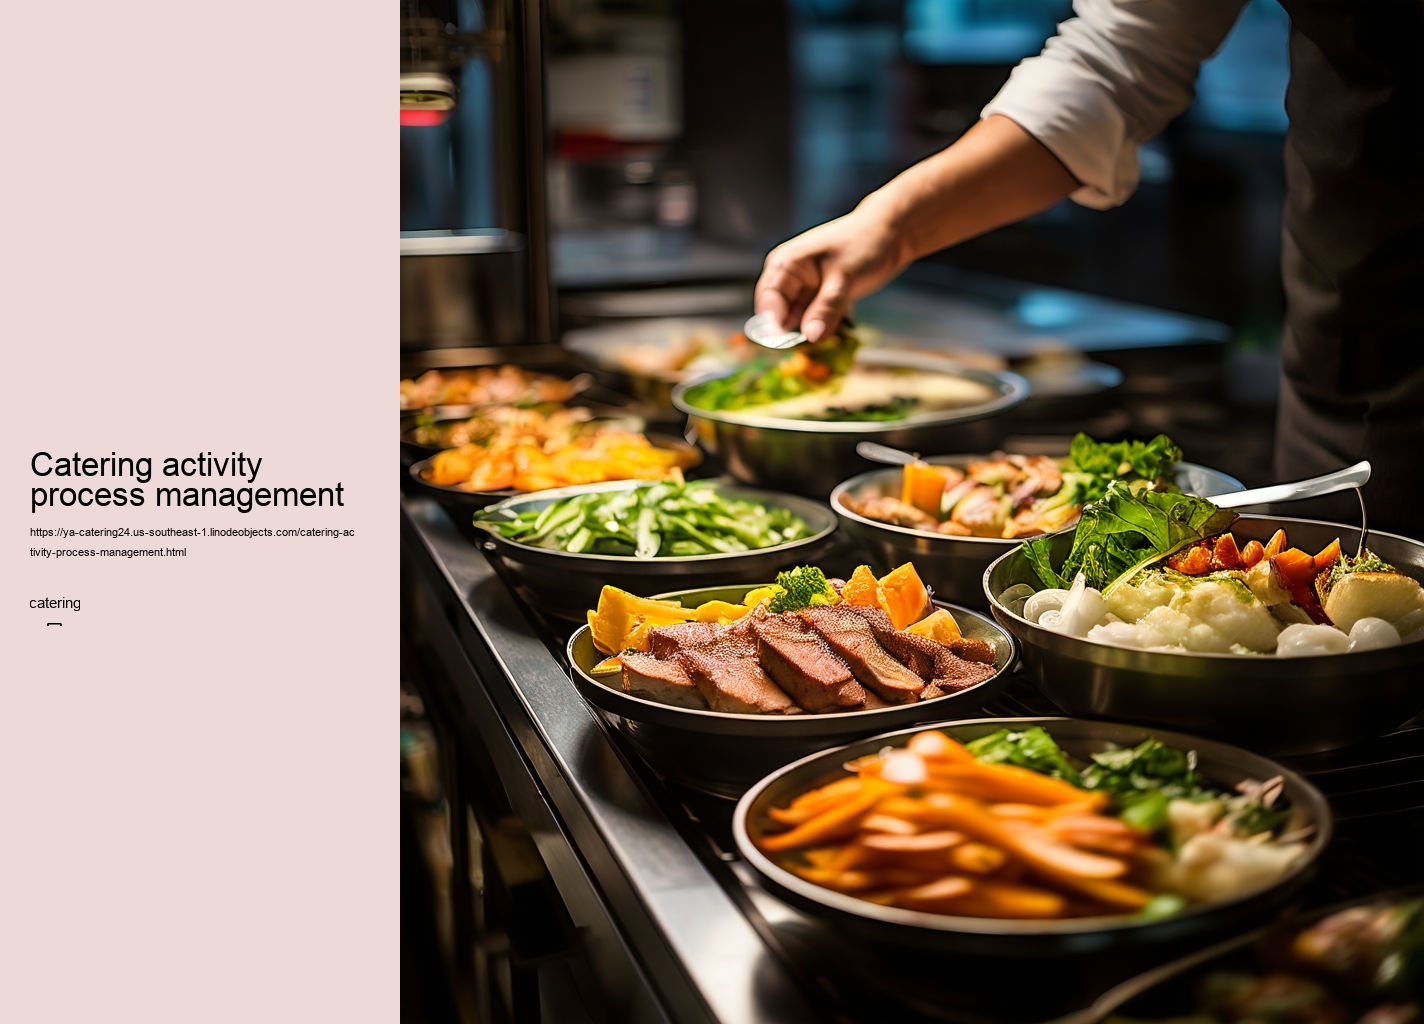 Catering activity process management